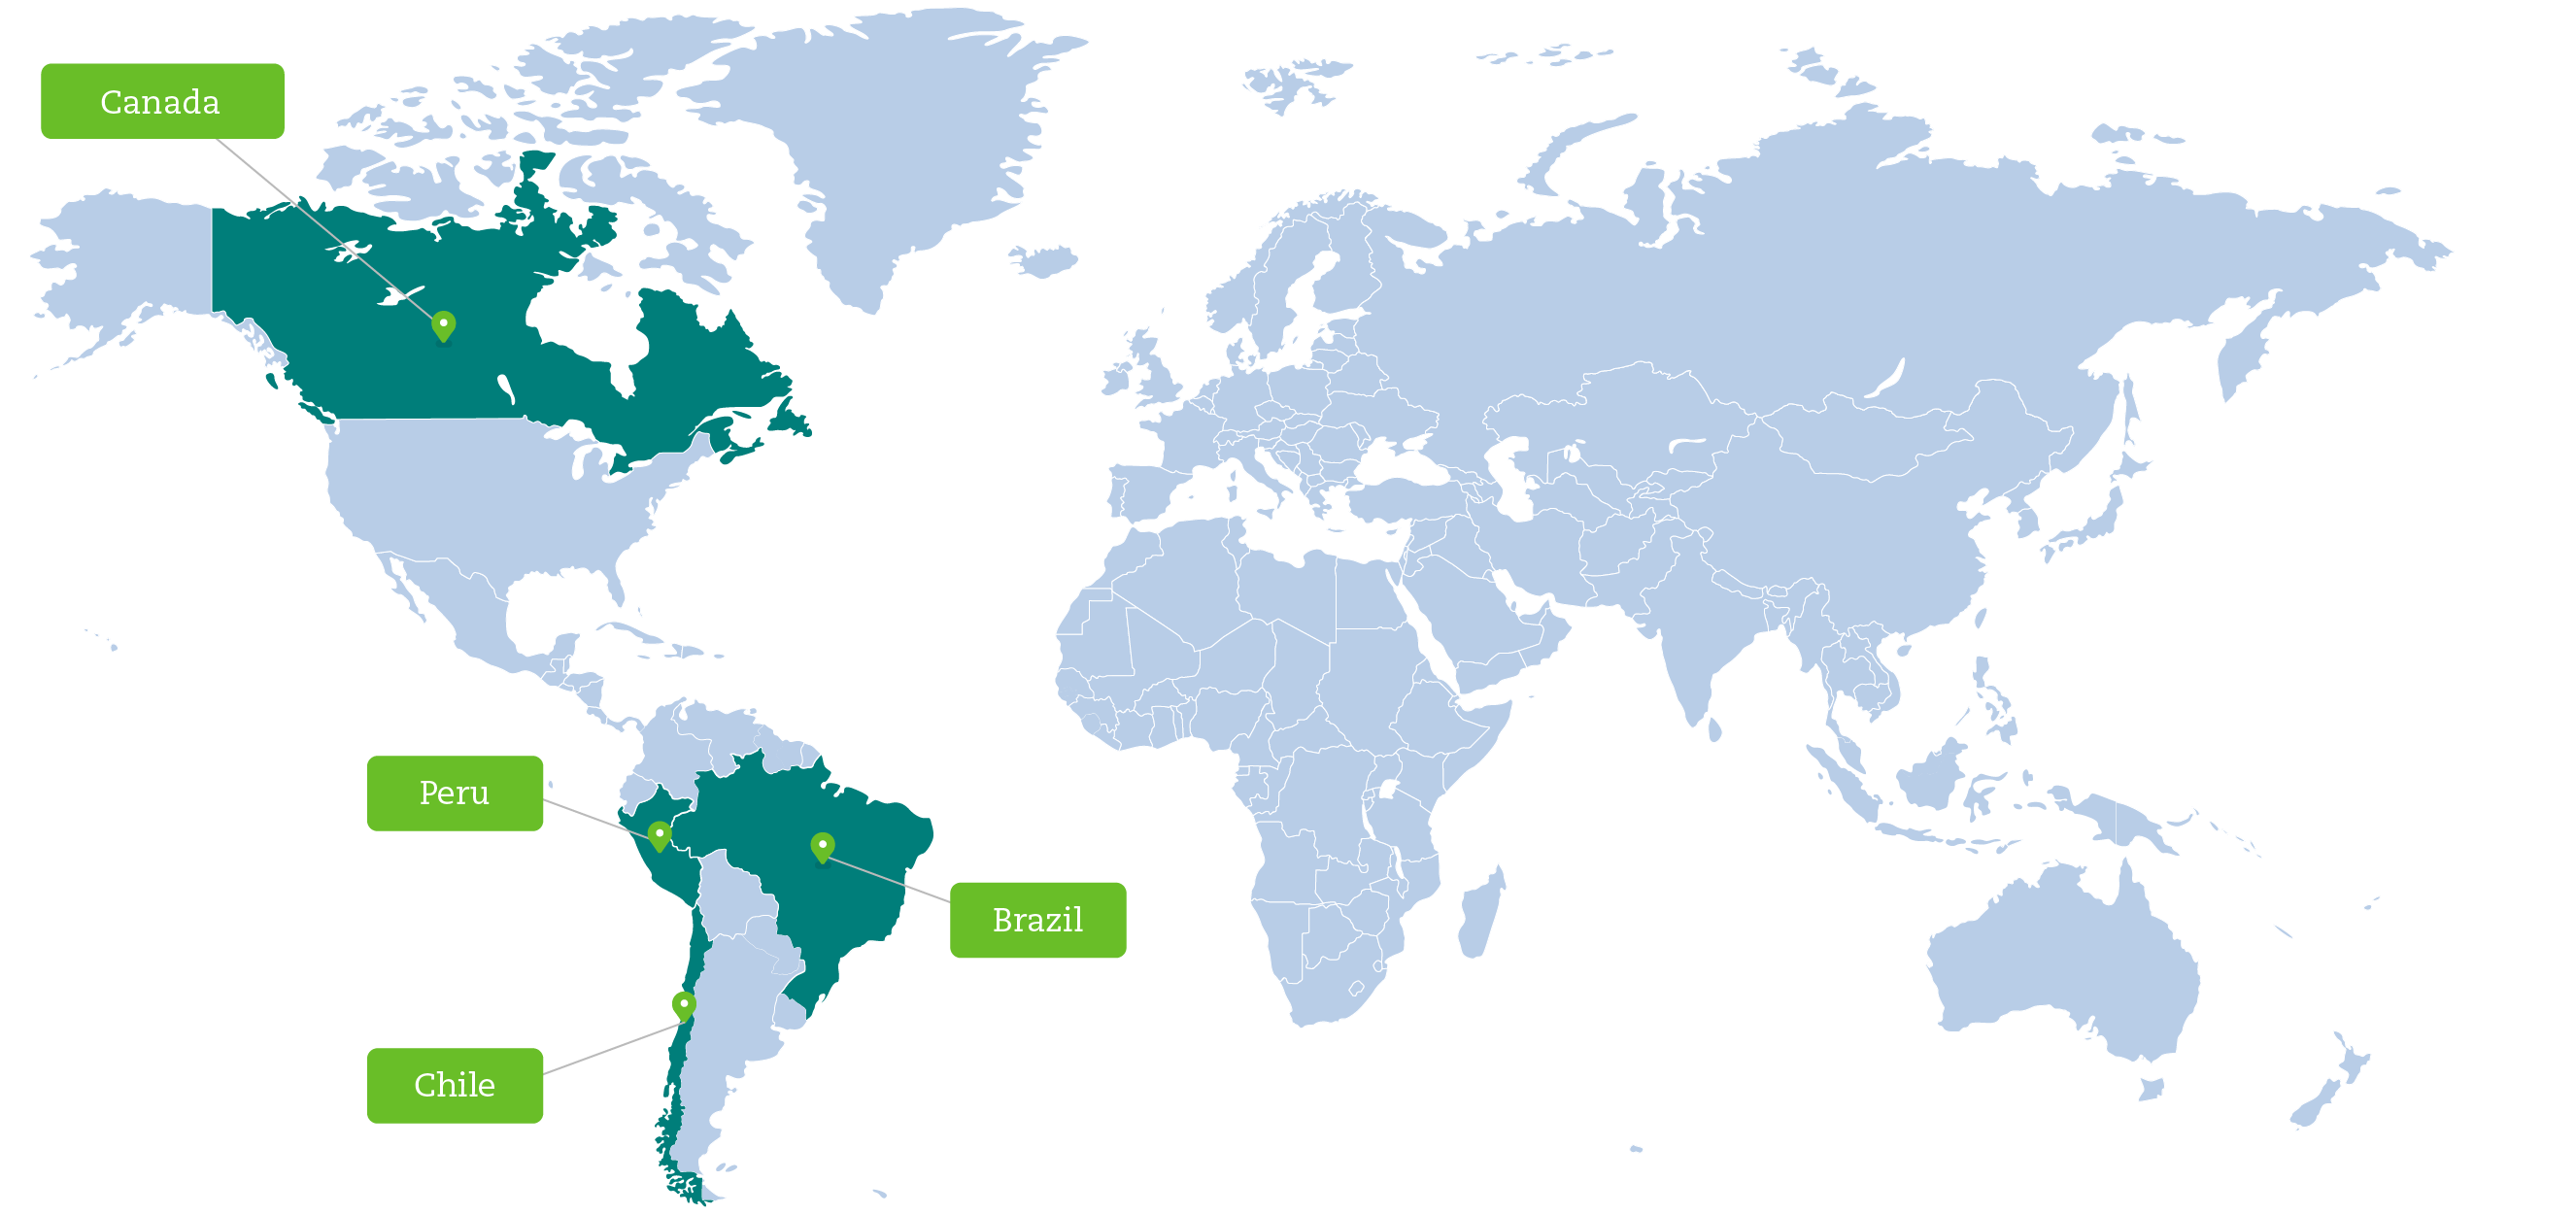 World map with marking of the countries Canada, Peru, Chile and Brazil.